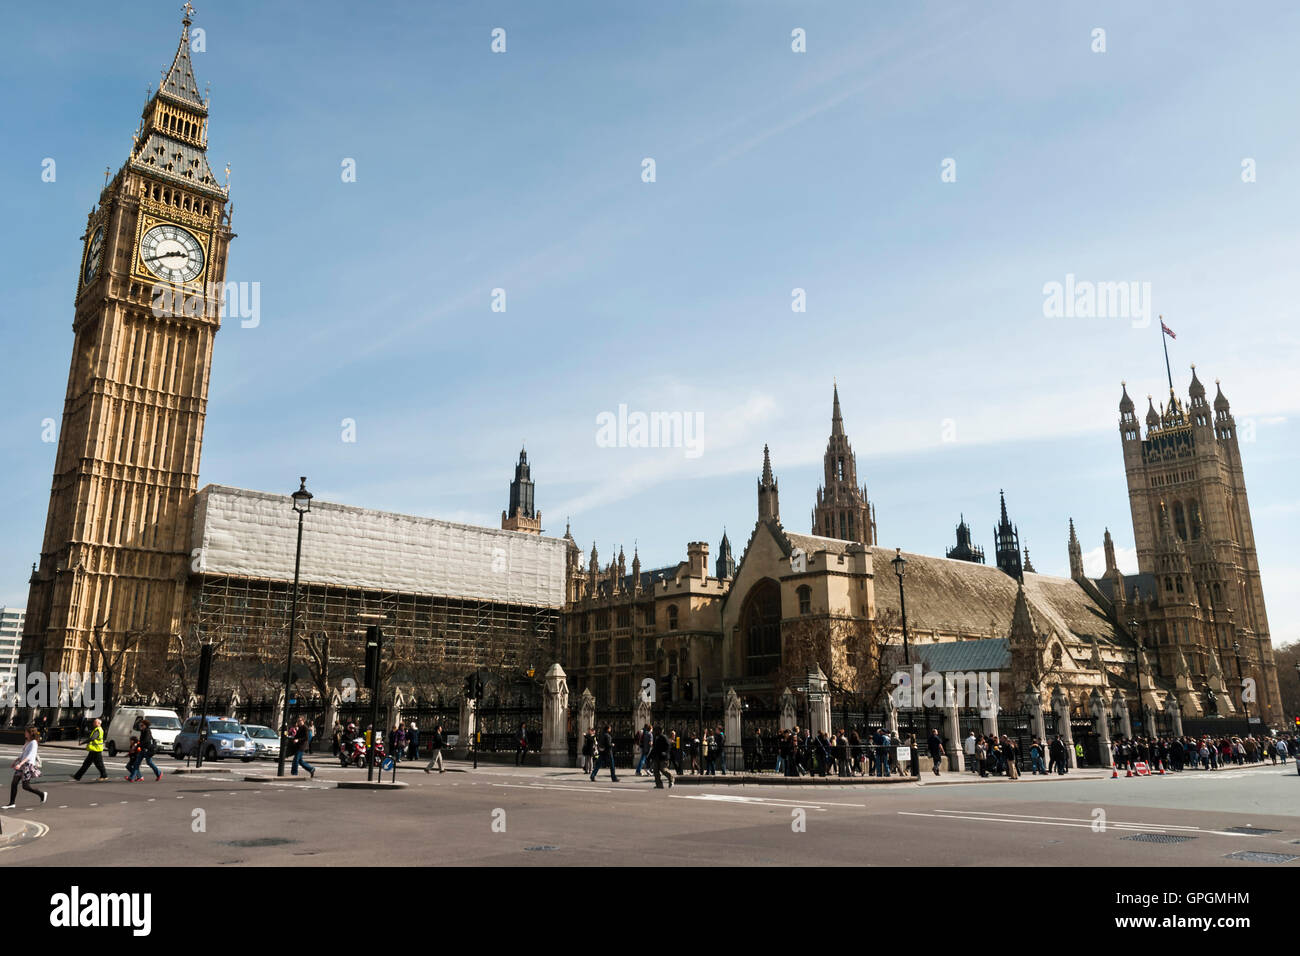 Big Ben and Houses of Parliament, UNESCO World Heritage Site, Westminster, London, England, United Kingdom, Europe Stock Photo